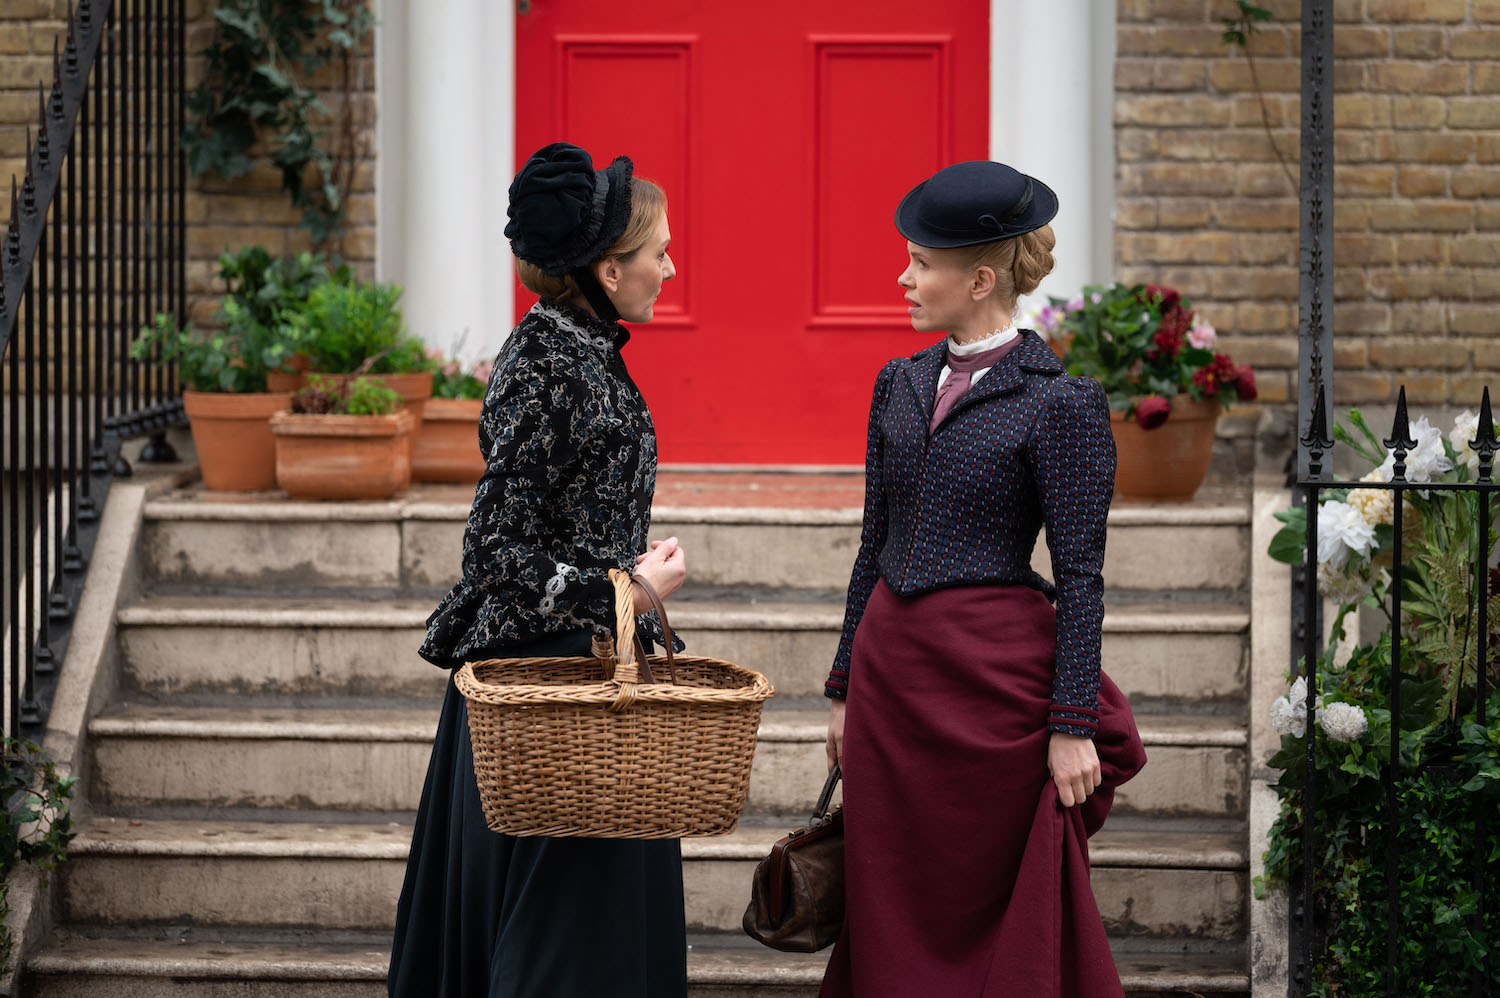  Kate Phillips and Cathy Belton in "Miss Scarlet and the Duke"